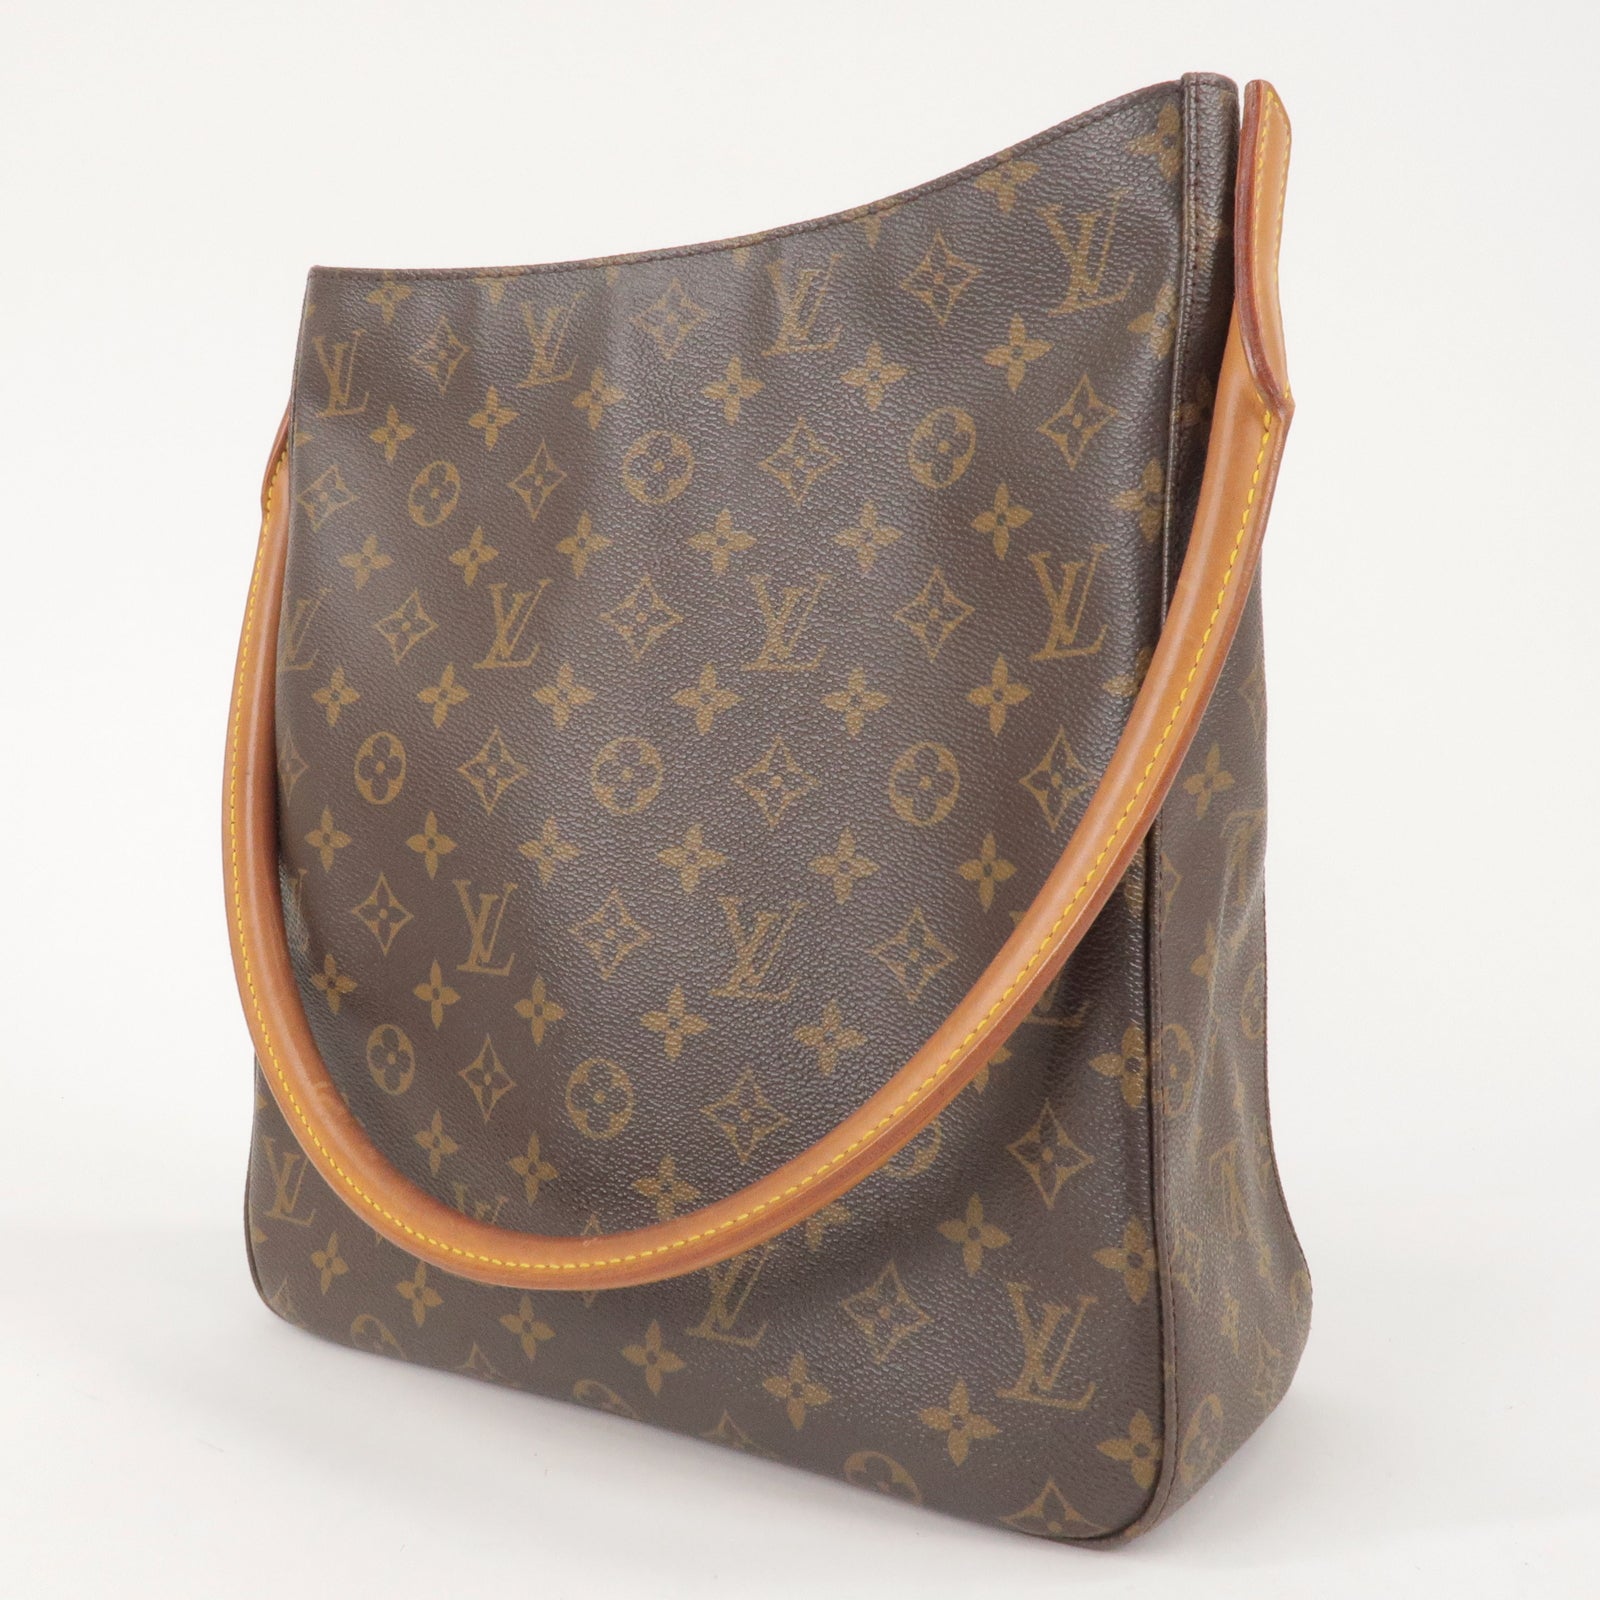 Louis Vuitton 2003 pre-owned Greenwich GM travel bag